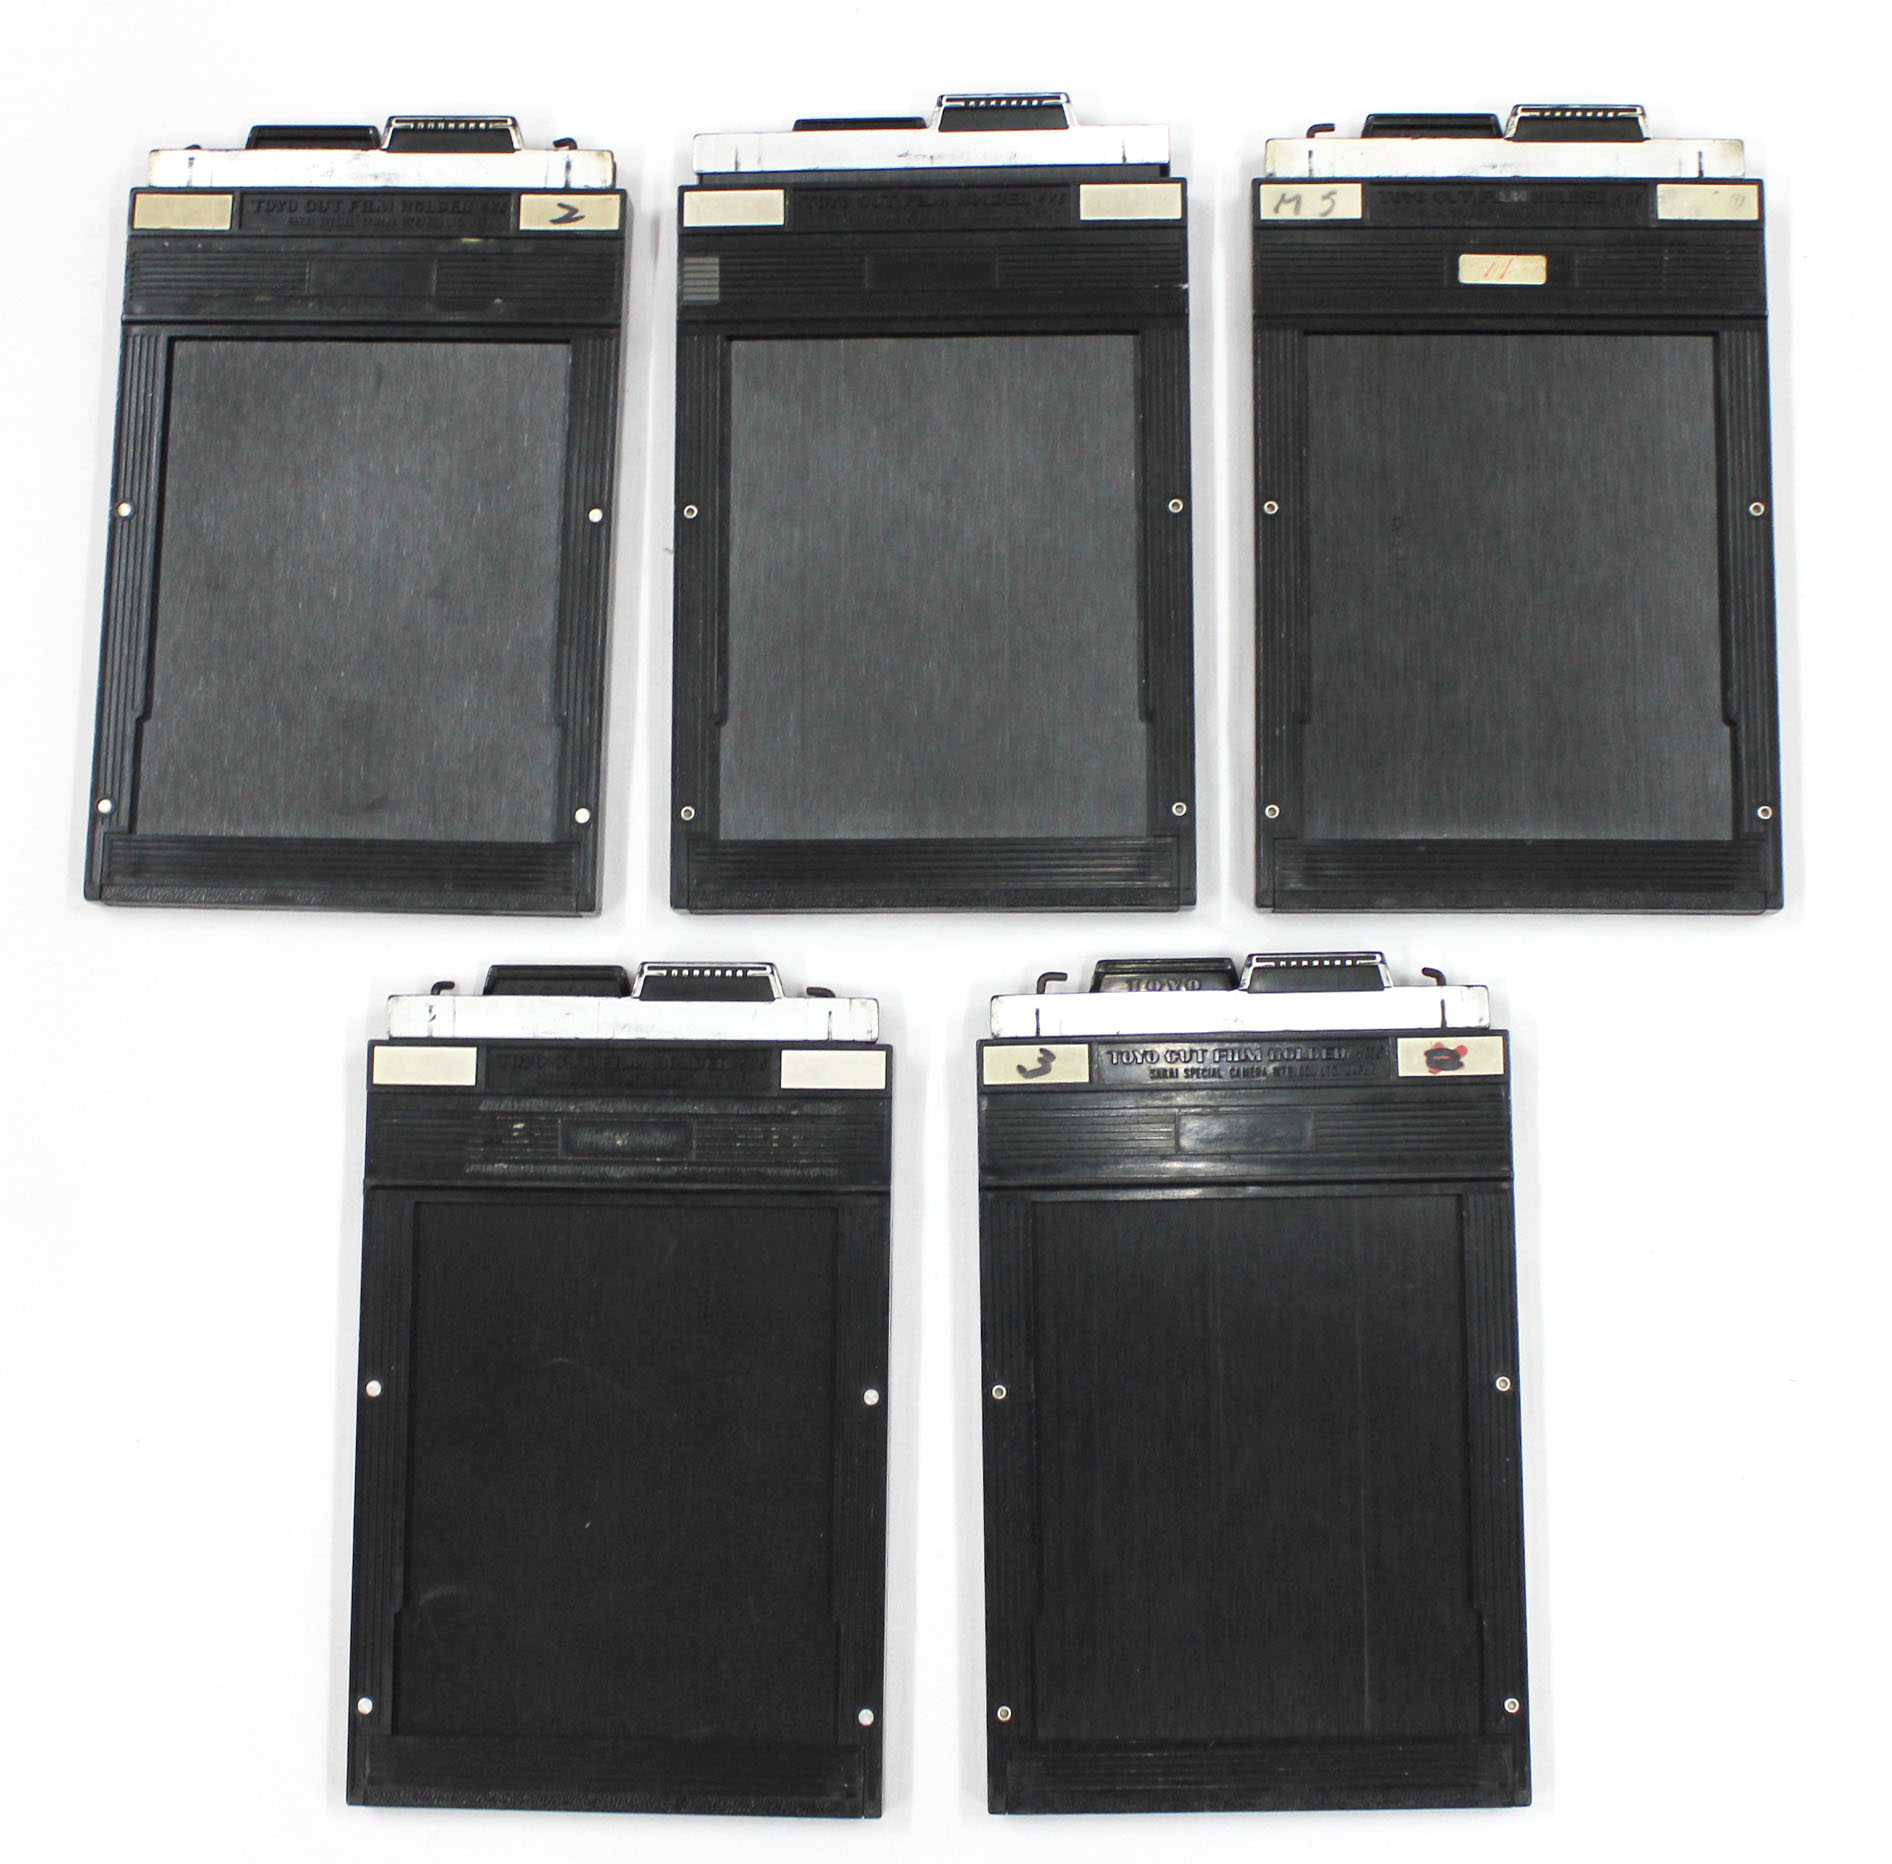 Japan Used Camera Shop | Toyo 4x5 Cut Film Holder Lot of 5 from Japan